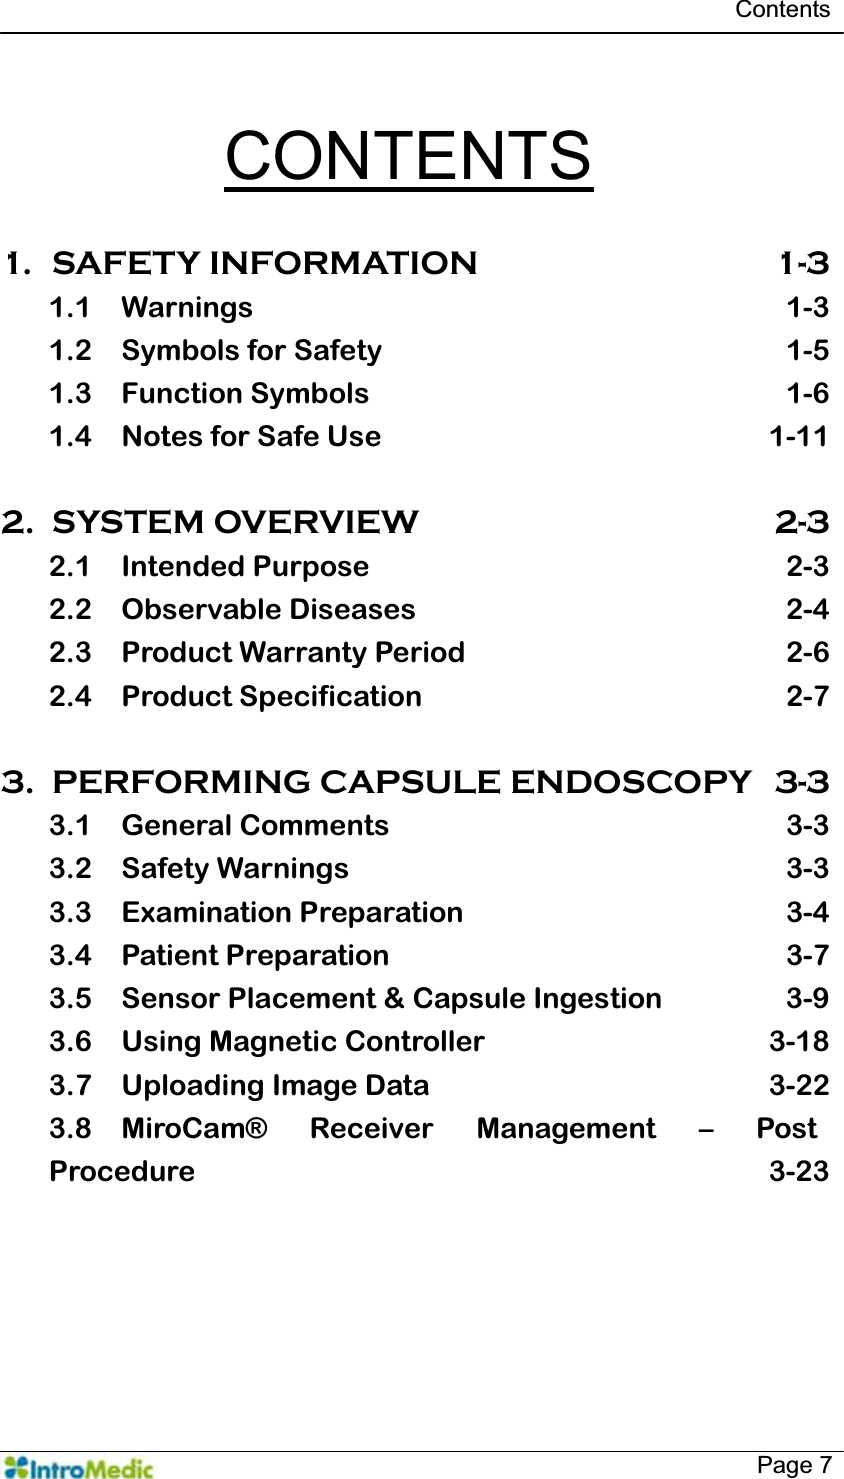   Contents   Page 7  CONTENTS  1. SAFETY INFORMATION  1-3 1.1 Warnings 1-3 1.2 Symbols for Safety  1-5 1.3 Function Symbols  1-6 1.4 Notes for Safe Use  1-11  2. SYSTEM OVERVIEW  2-3 2.1 Intended Purpose  2-3 2.2 Observable Diseases  2-4 2.3 Product Warranty Period  2-6 2.4 Product Specification  2-7  3. PERFORMING CAPSULE ENDOSCOPY  3-3 3.1 General Comments  3-3 3.2 Safety Warnings  3-3 3.3 Examination Preparation  3-4 3.4 Patient Preparation  3-7 3.5 Sensor Placement &amp; Capsule Ingestion  3-9 3.6 Using Magnetic Controller  3-18 3.7 Uploading Image Data  3-22 3.8 MiroCam® Receiver Management ² Post Procedure 3-23  